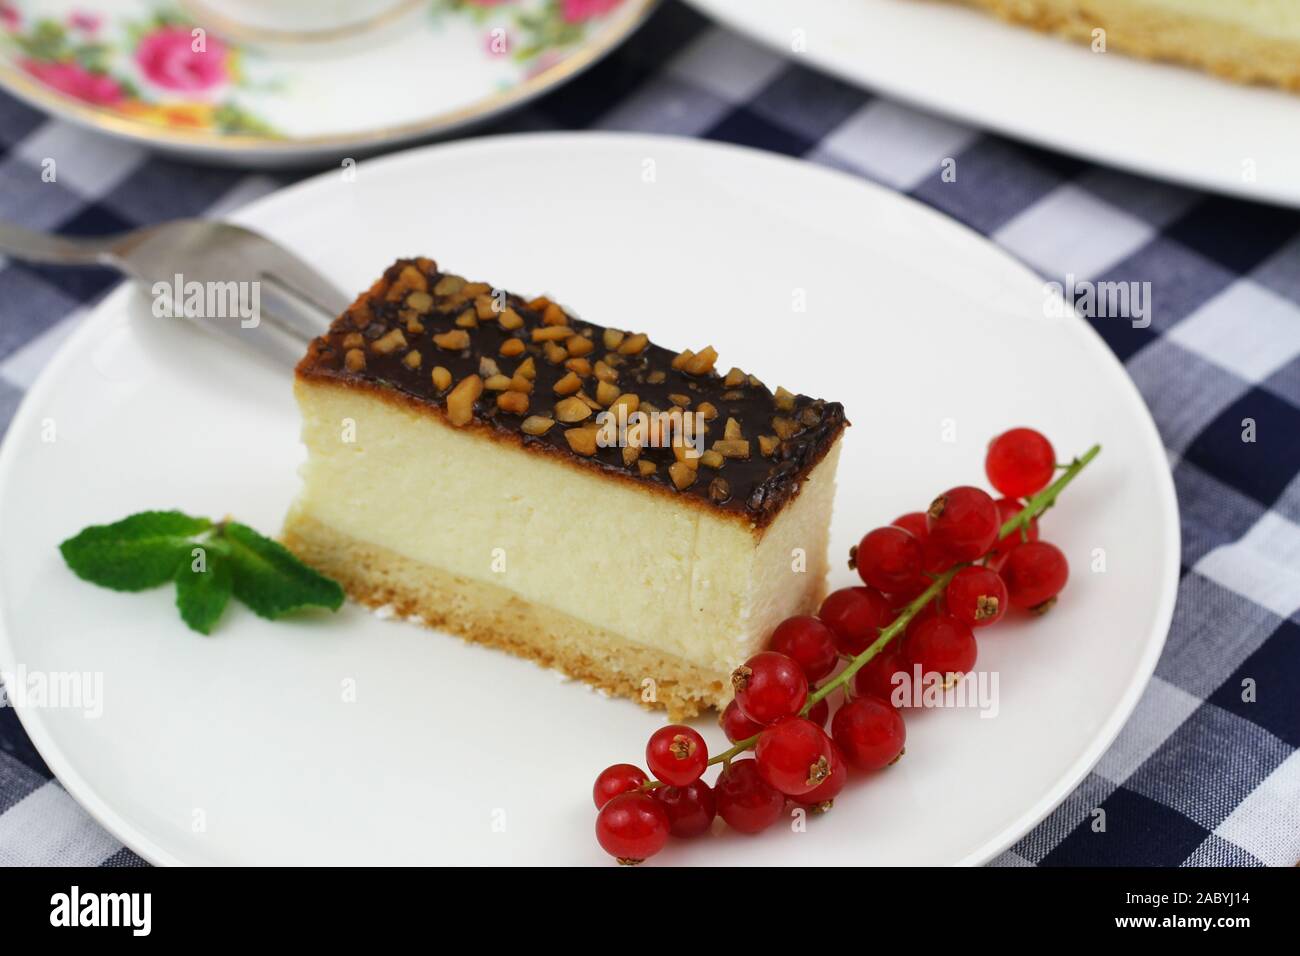 Slice of baked cheesecake with chocolate topping sprinkled with nuts and red current Stock Photo